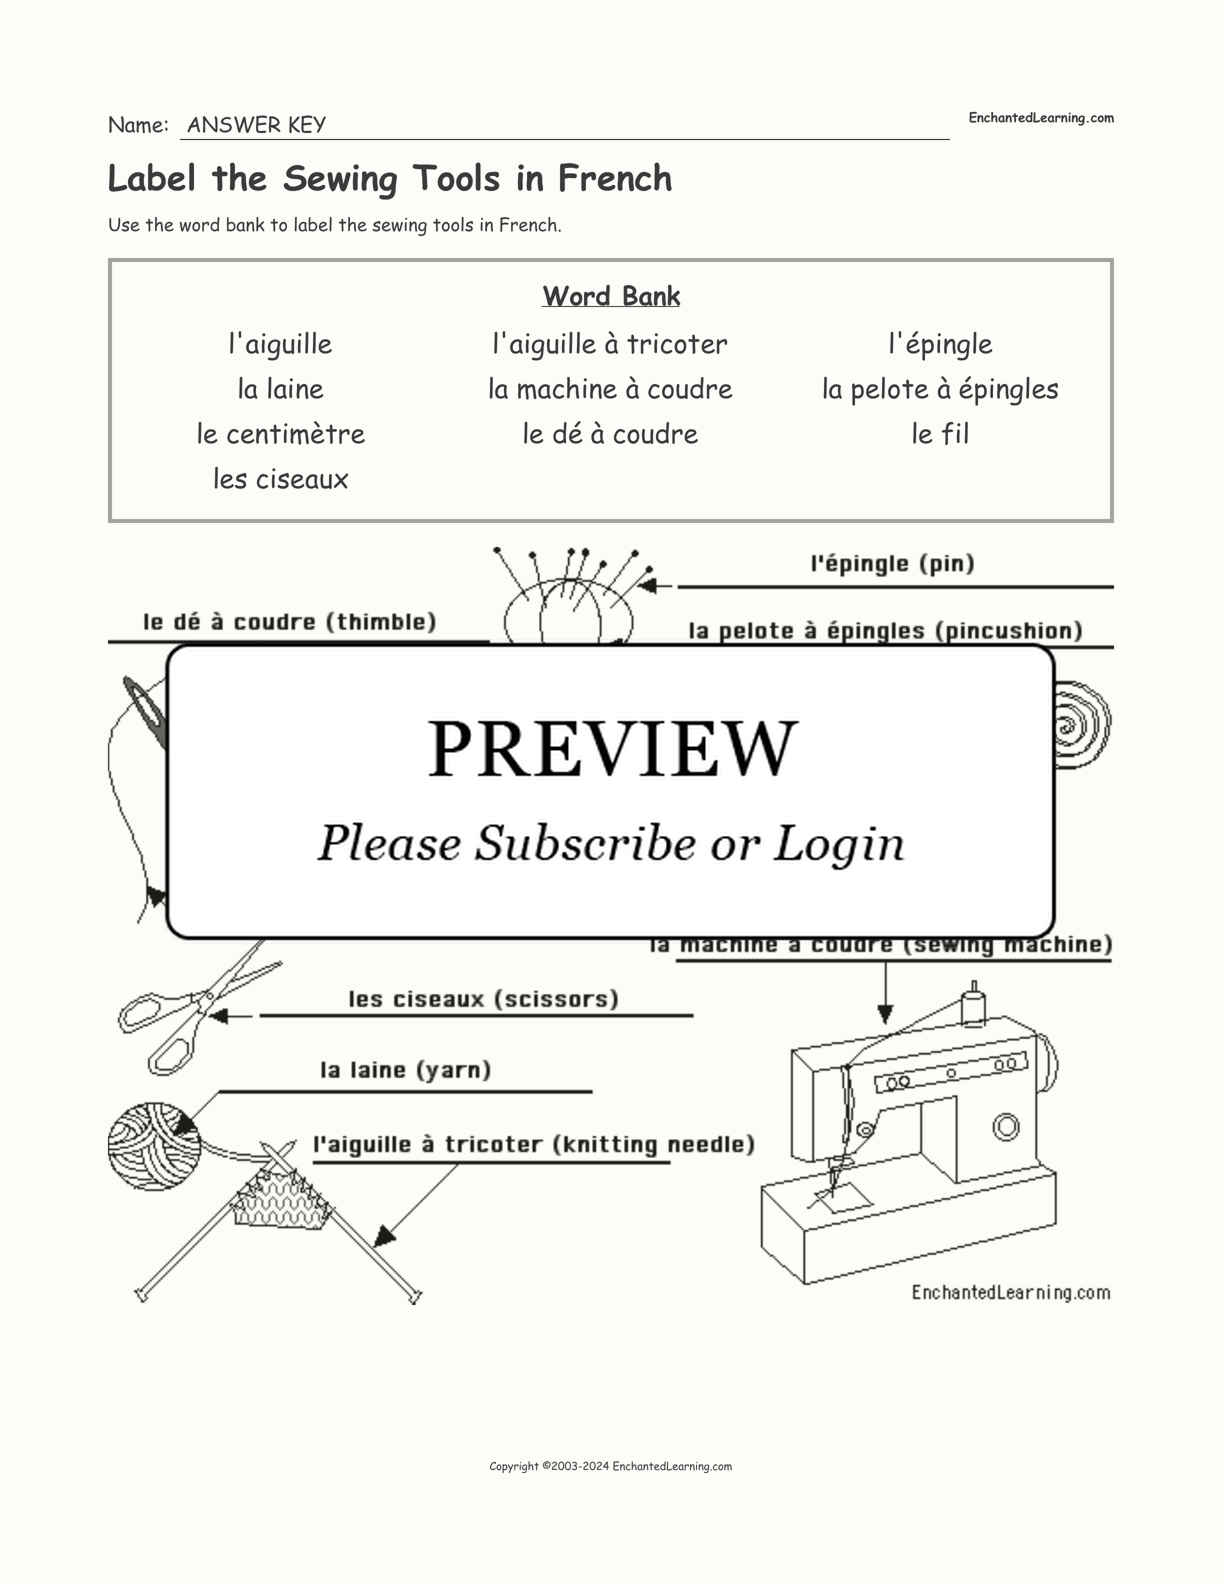 Label the Sewing Tools in French interactive worksheet page 2